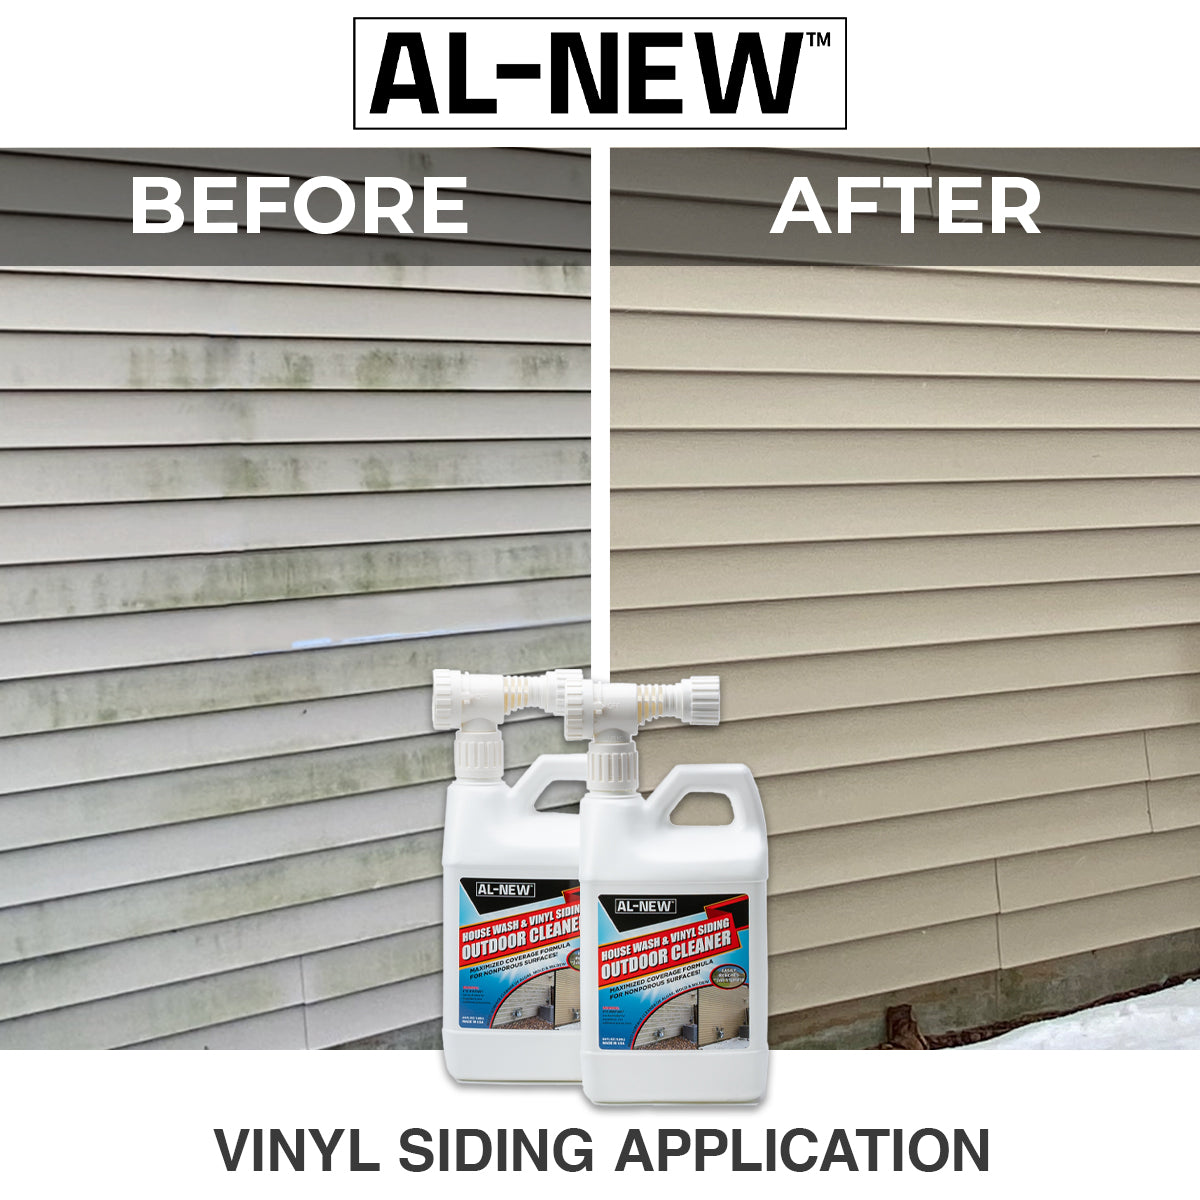 House and siding Outdoor Cleaners at